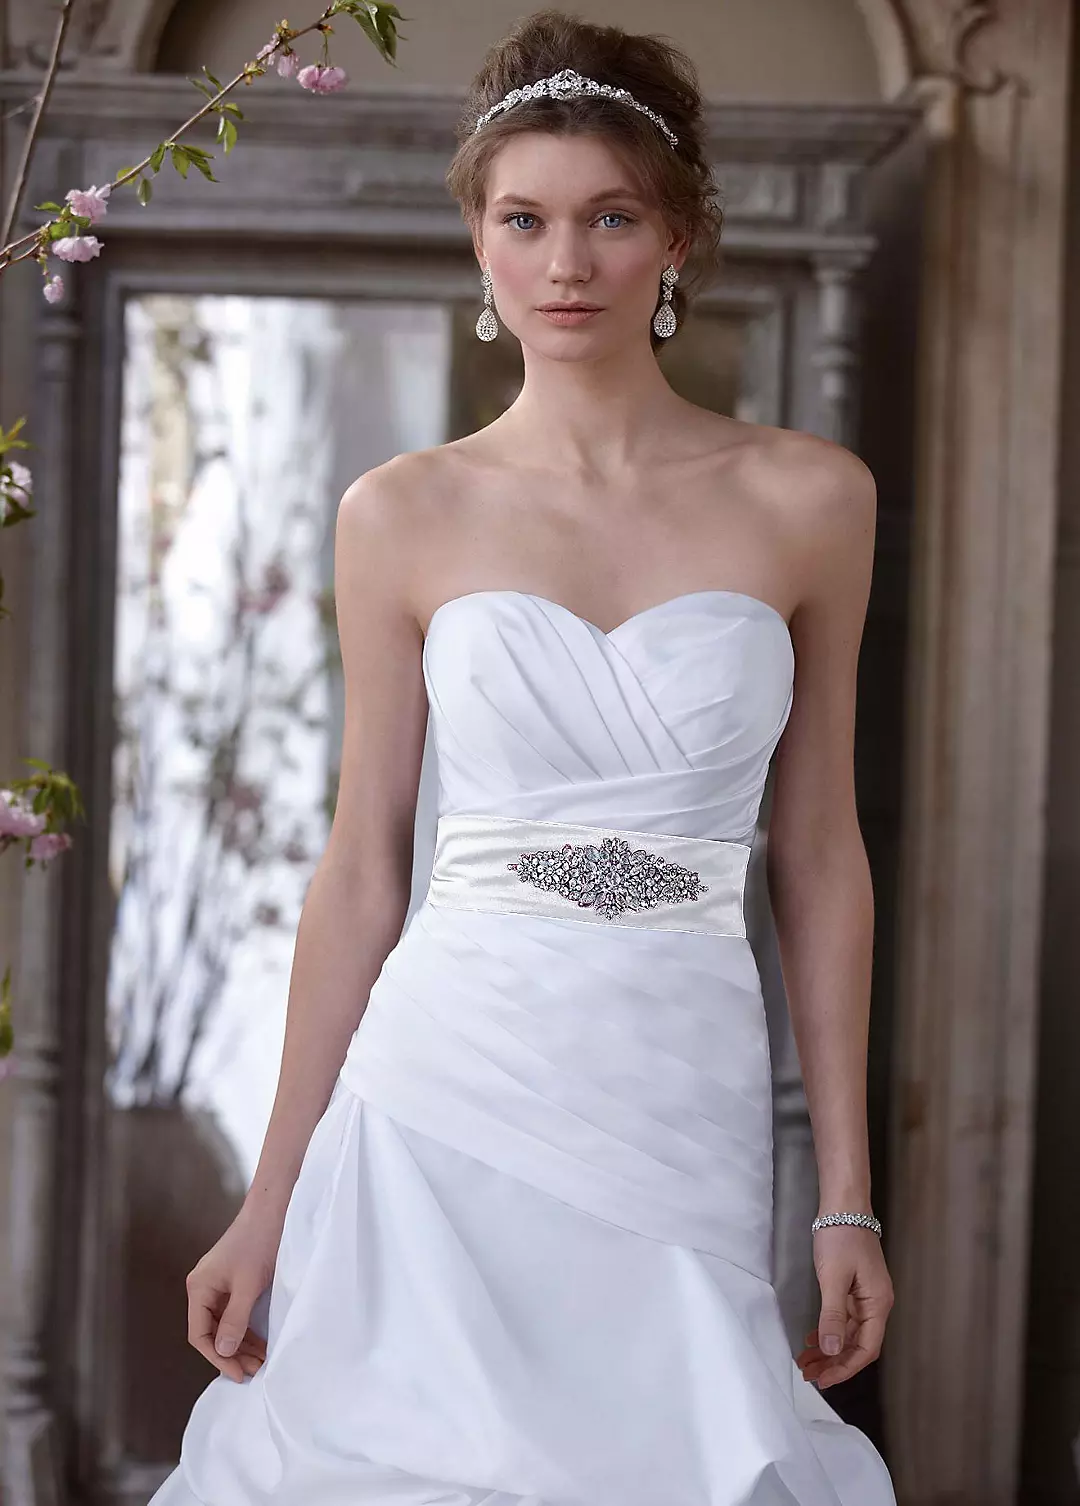 Dropped Waist Strapless Sweetheart Wedding Gown Image